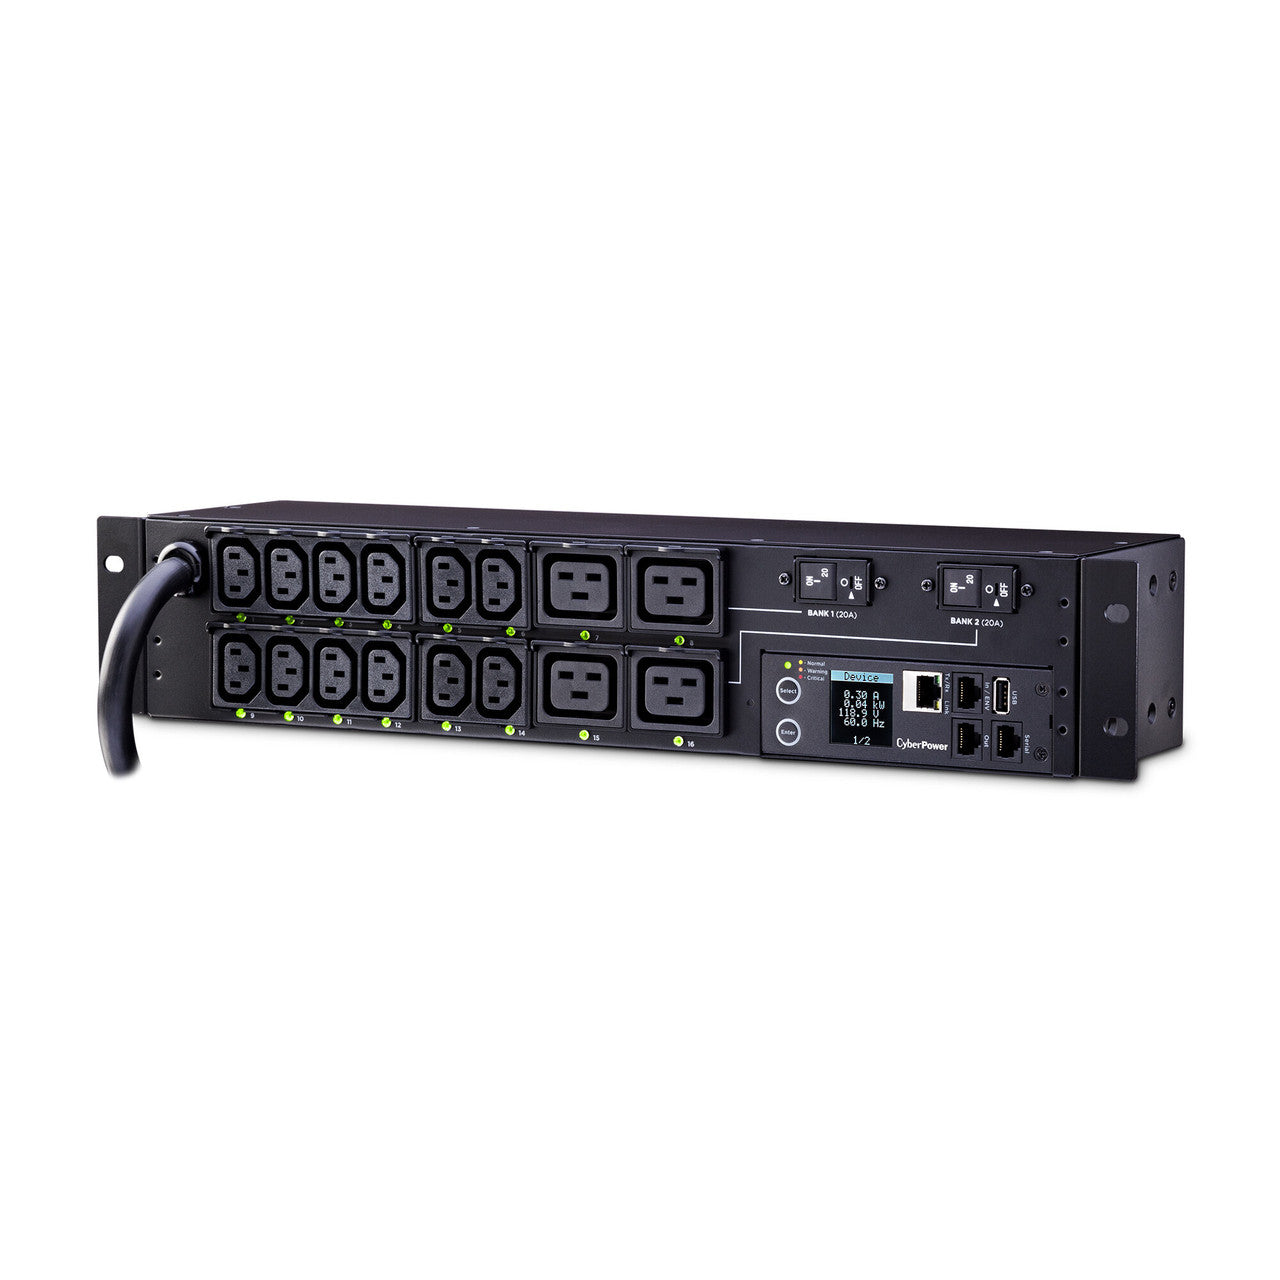 CyberPower PDU81008 SW MBO PDU 30A 208V Metered-by-Outlet Switched PDU 16 C13-C19 Outlets 12ft cord 3yr Warranty